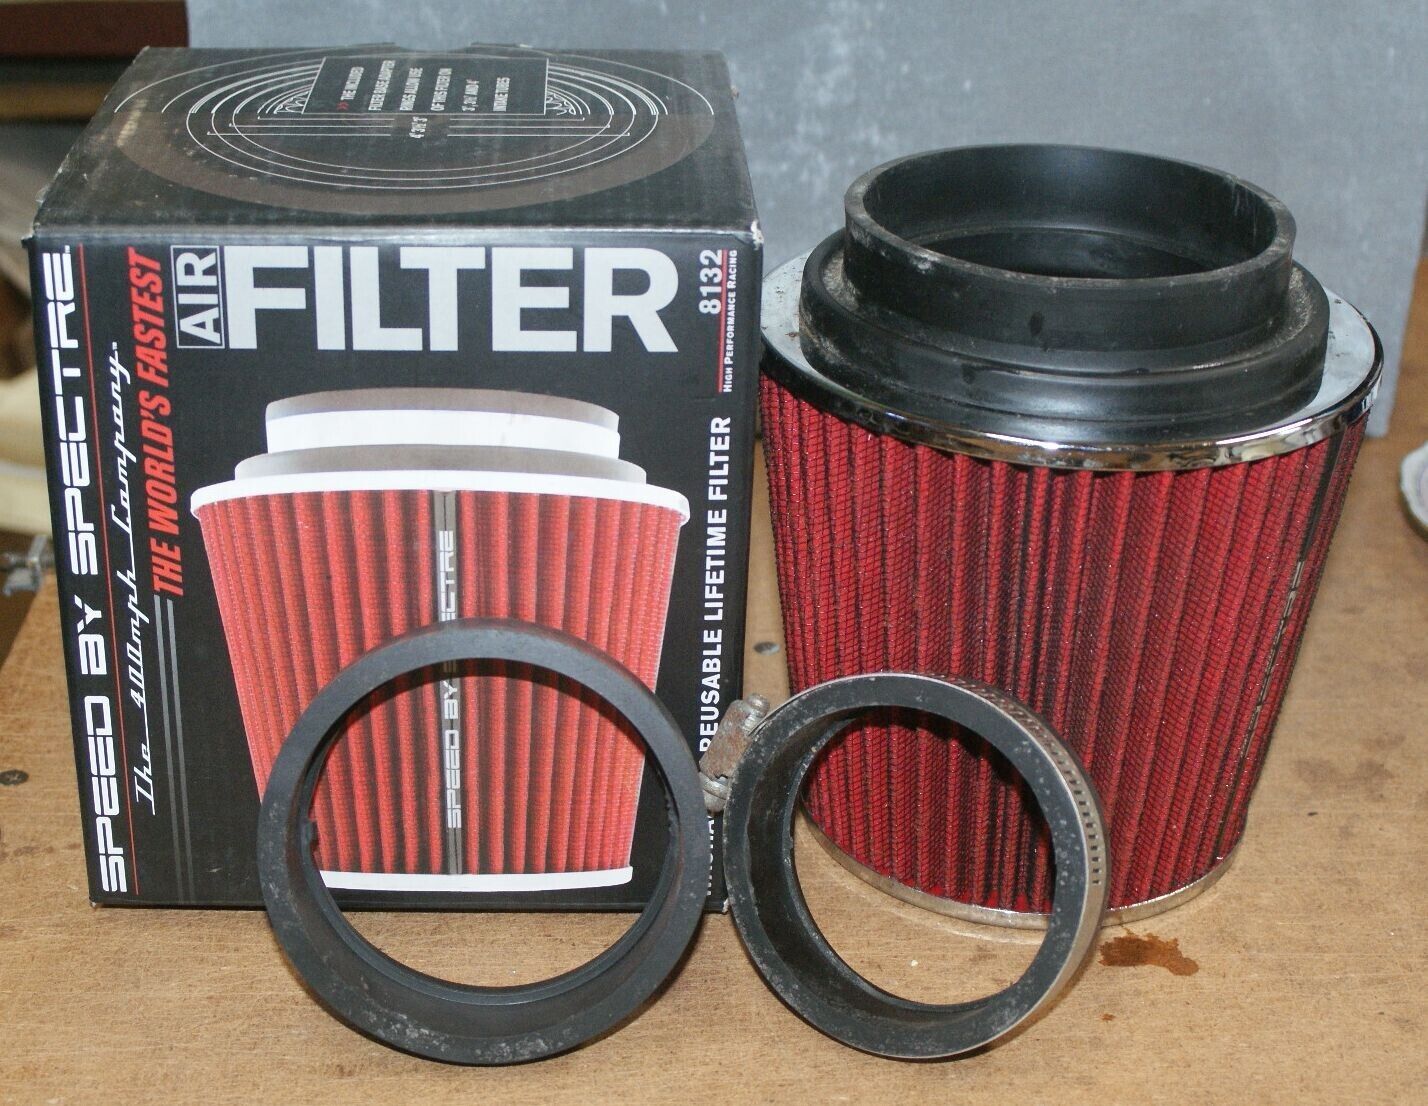 SPEED by SPECTRE AIR FILTER 8132 PRE-OILED USED OPEN BOX w/ADAPTERS & 3” CLAMP